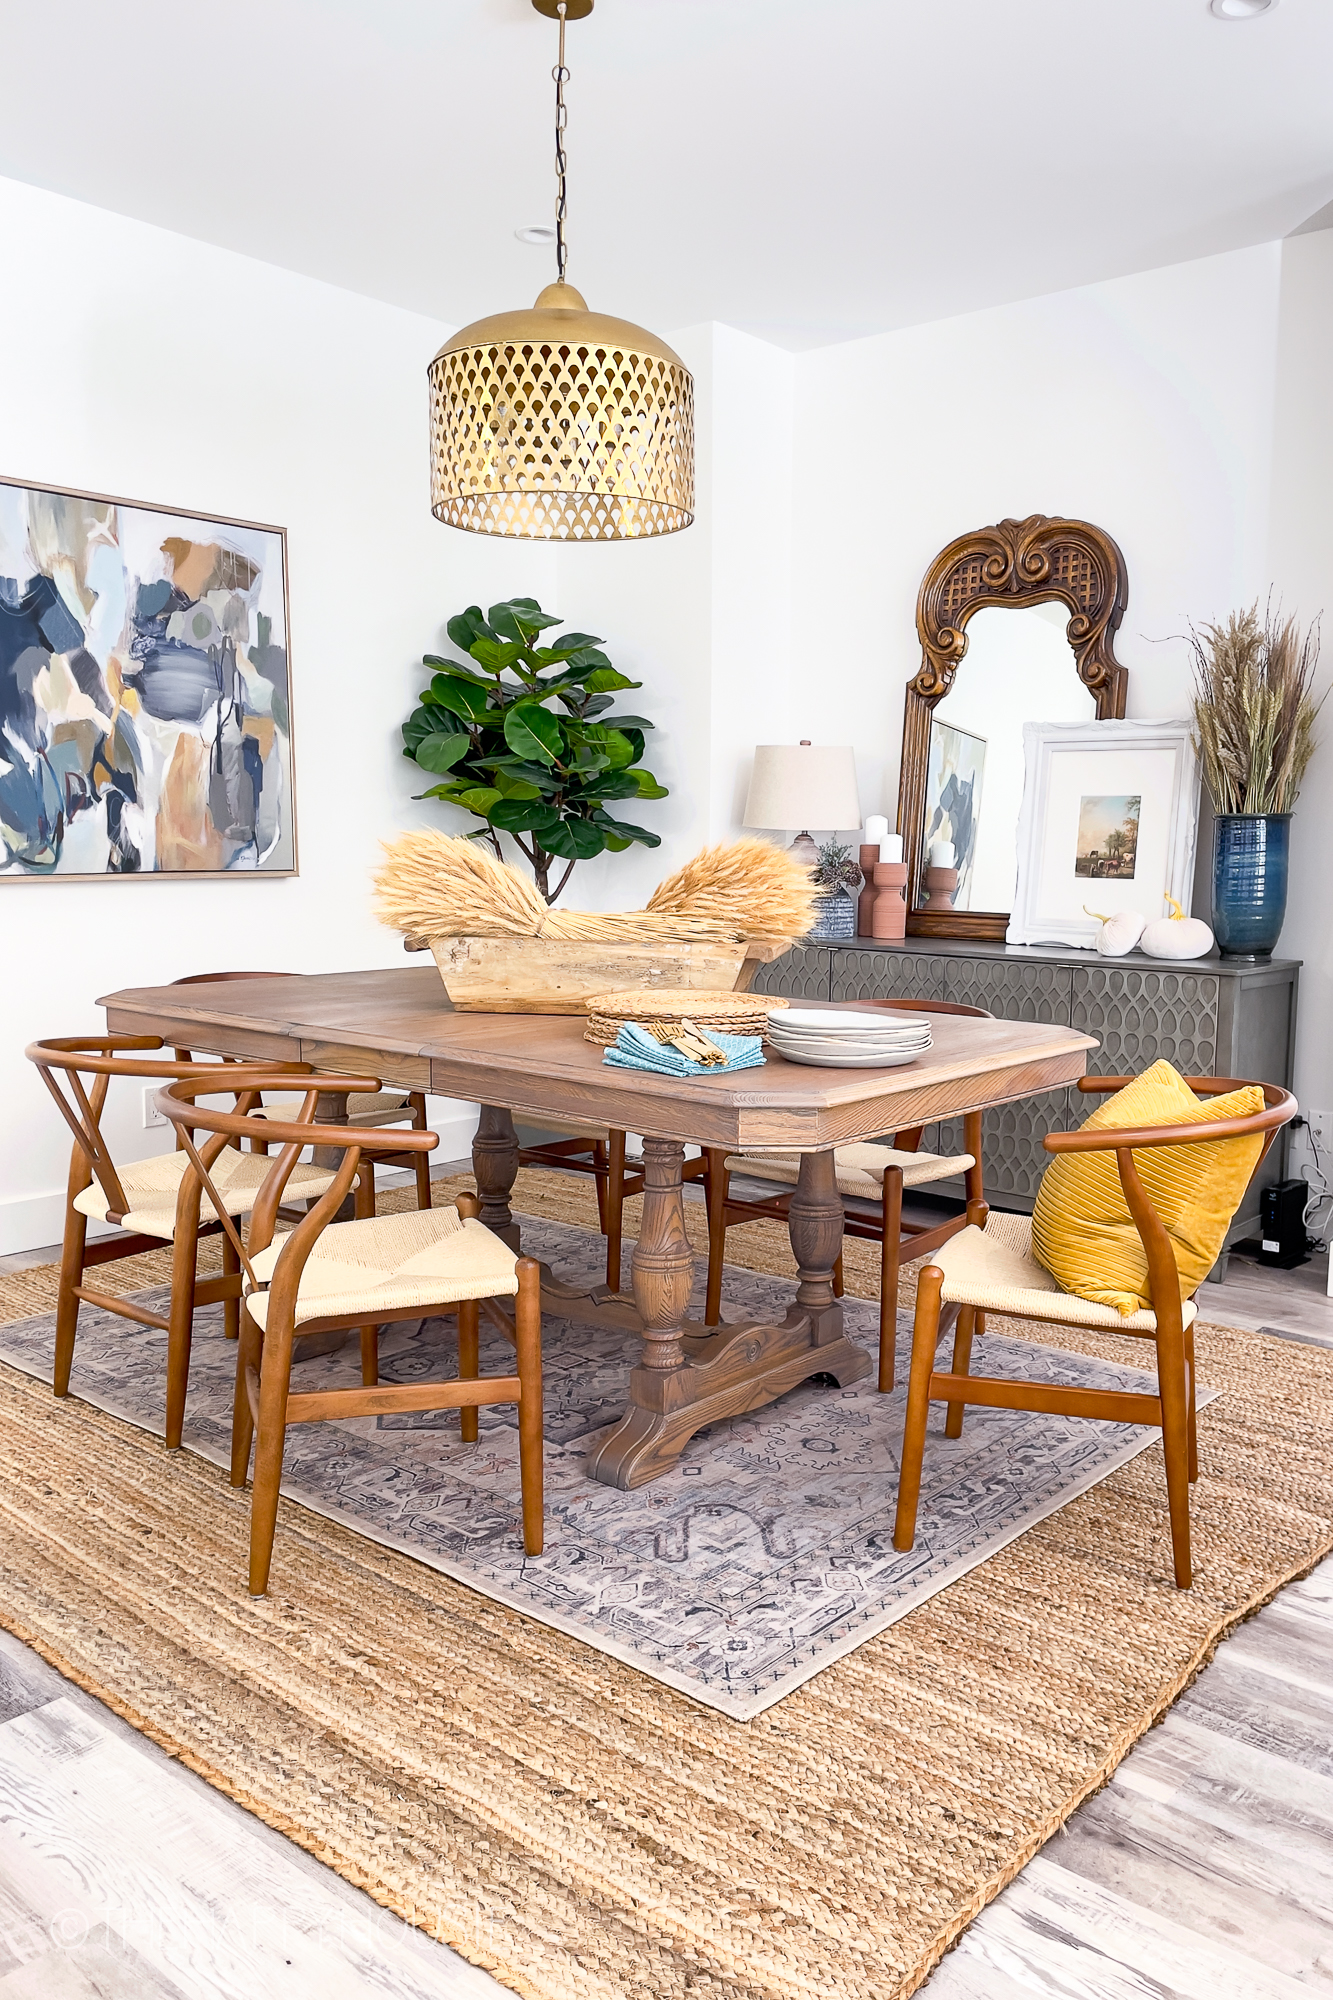 A wooden dining room table with a rug underneath and a gold light over the table.